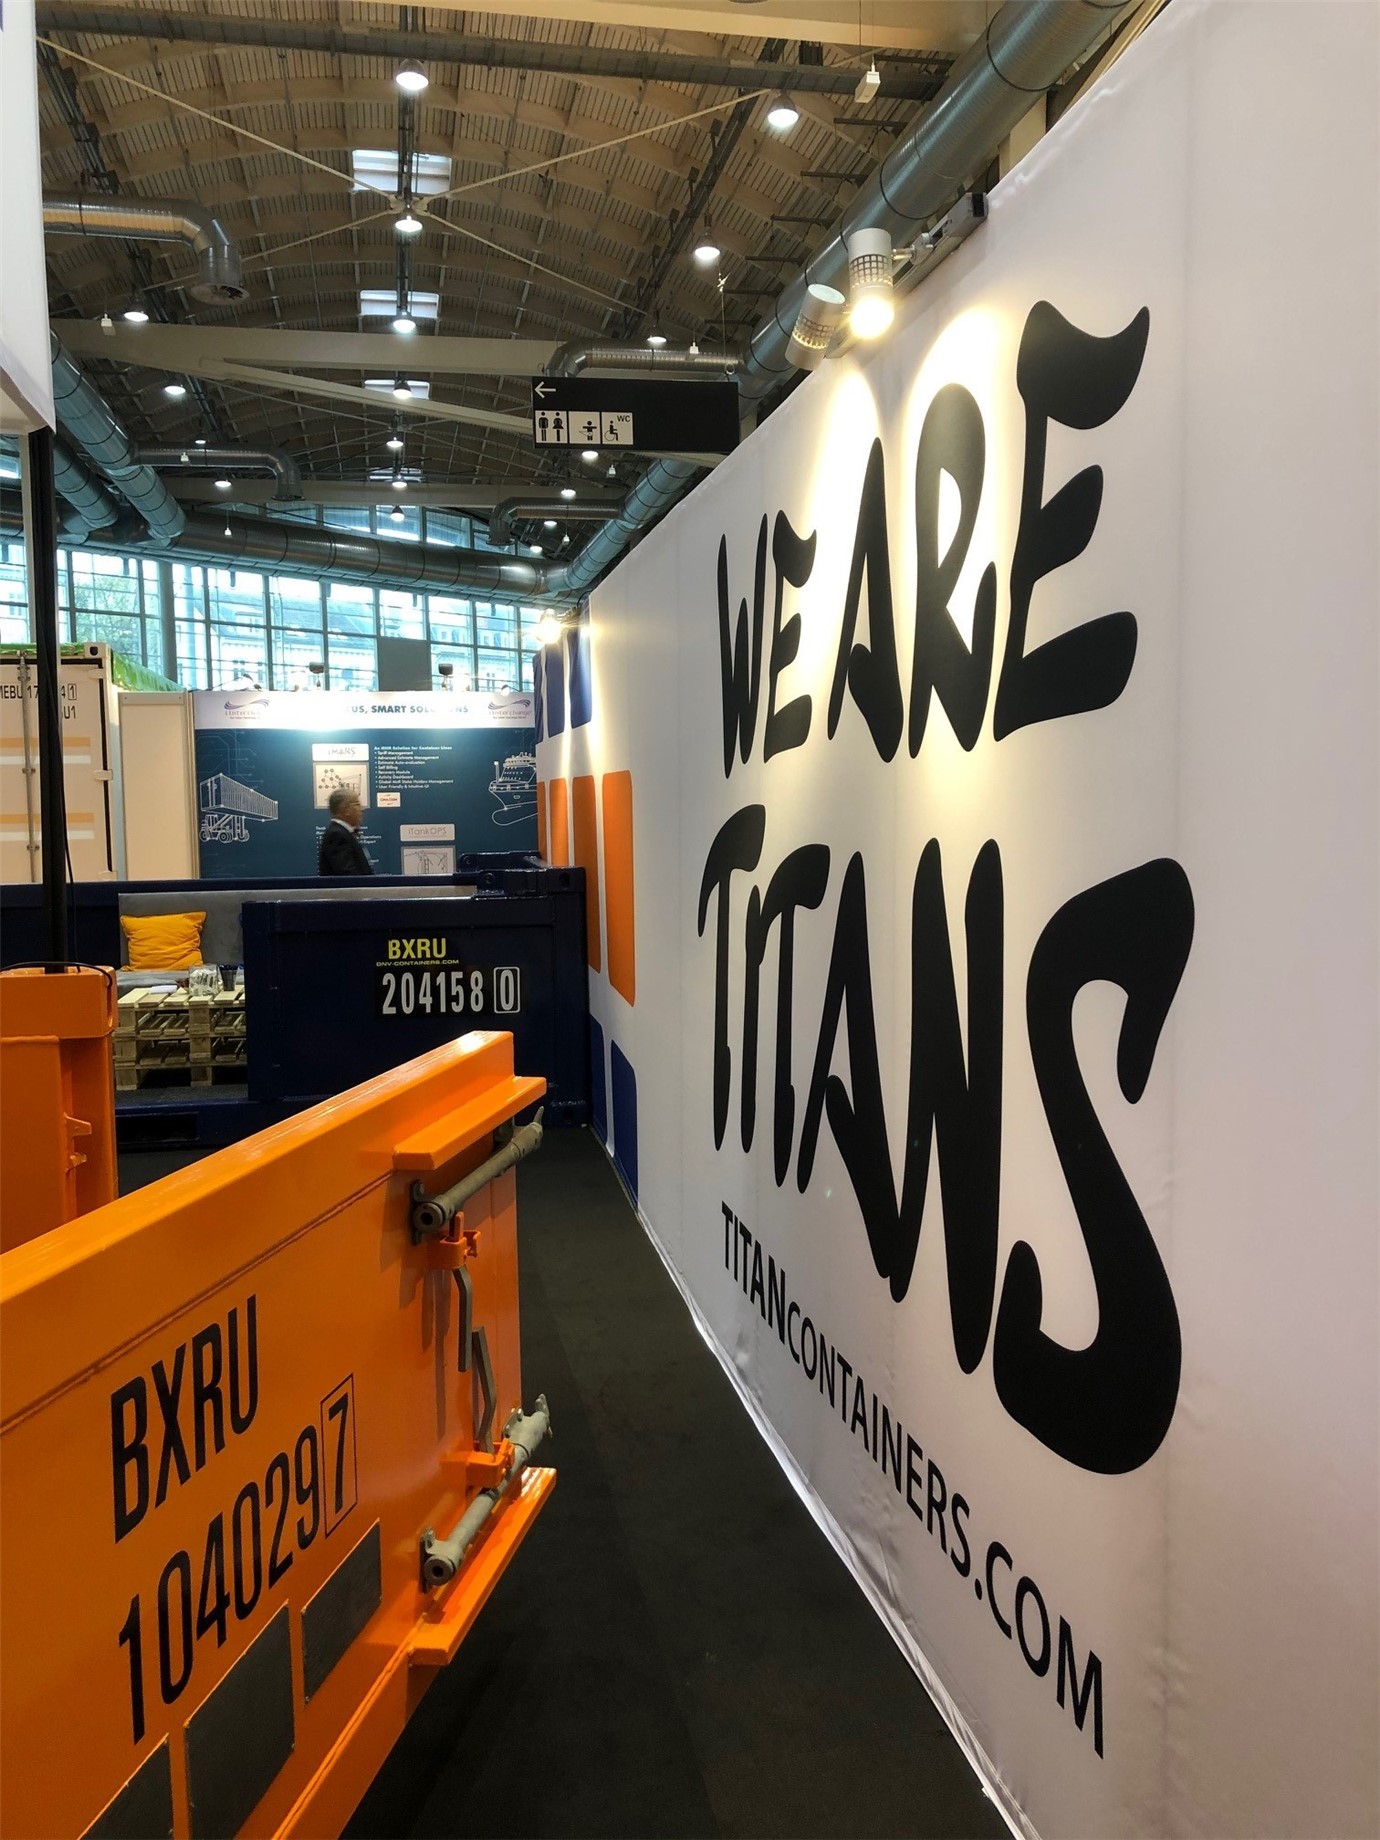 Intermodal Europe 2019 is here3